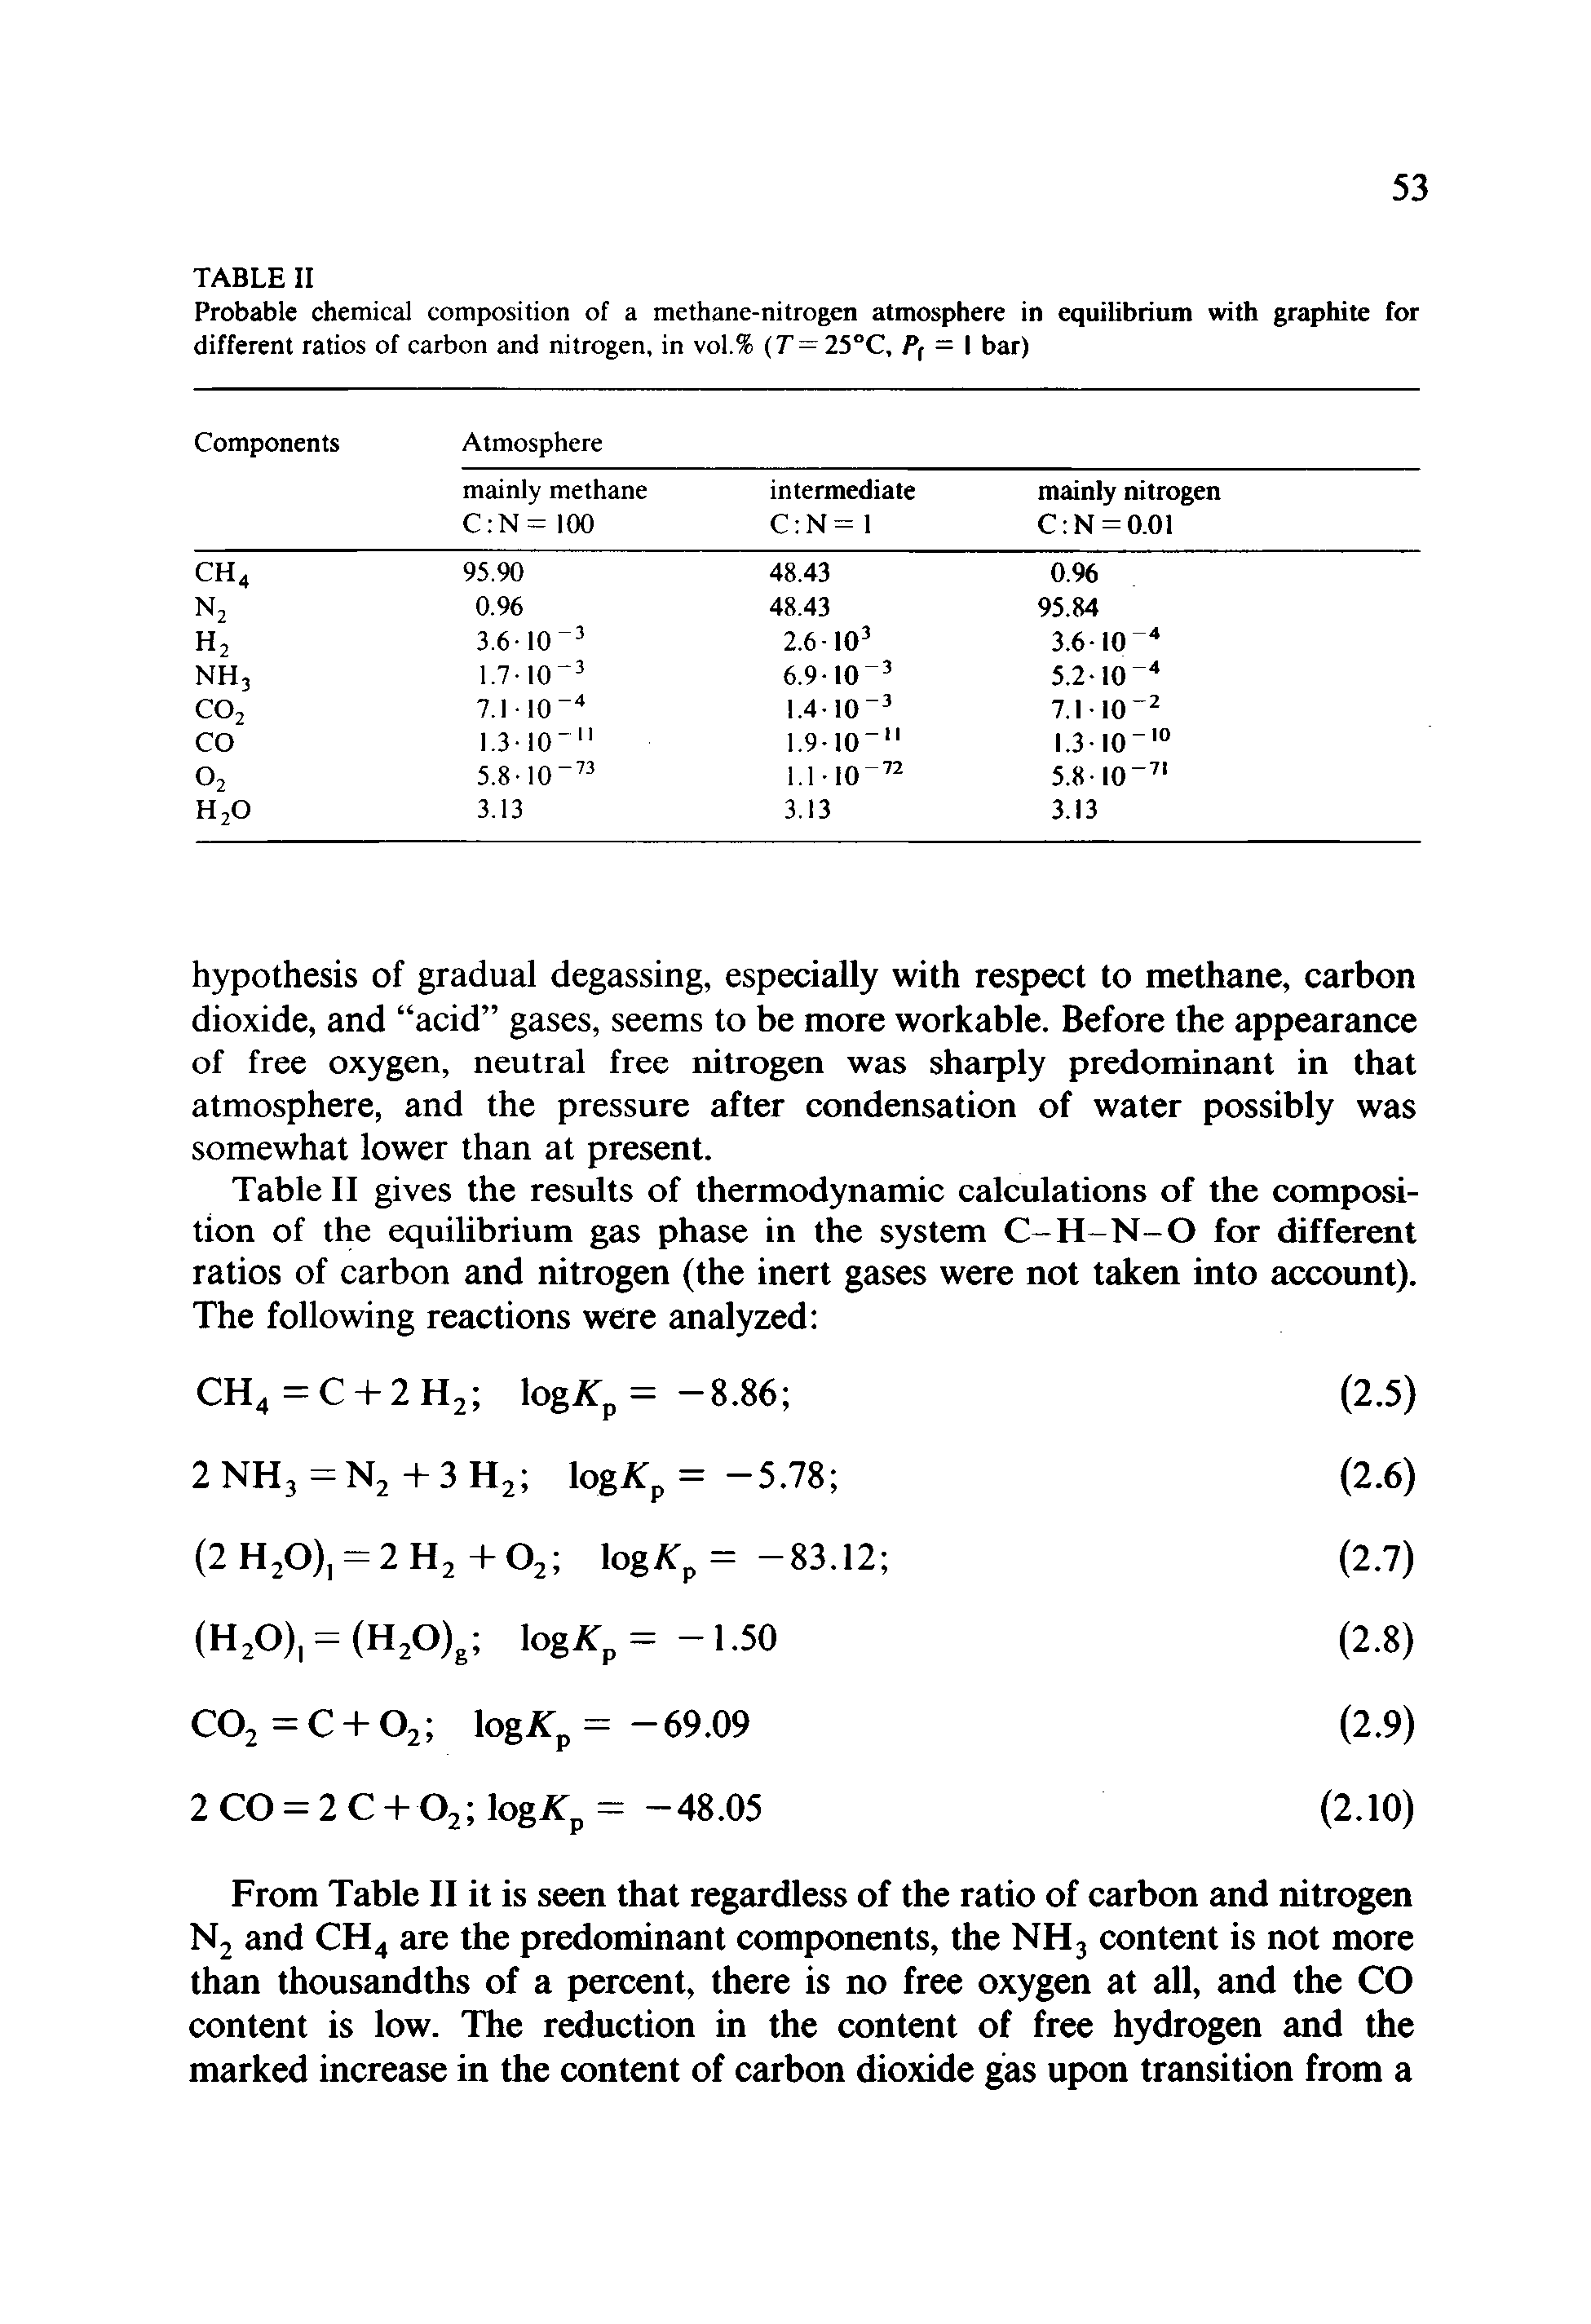 Table II gives the results of thermodynamic calculations of the composition of the equilibrium gas phase in the system C-H-N-O for different ratios of carbon and nitrogen (the inert gases were not taken into account). The following reactions were analyzed ...